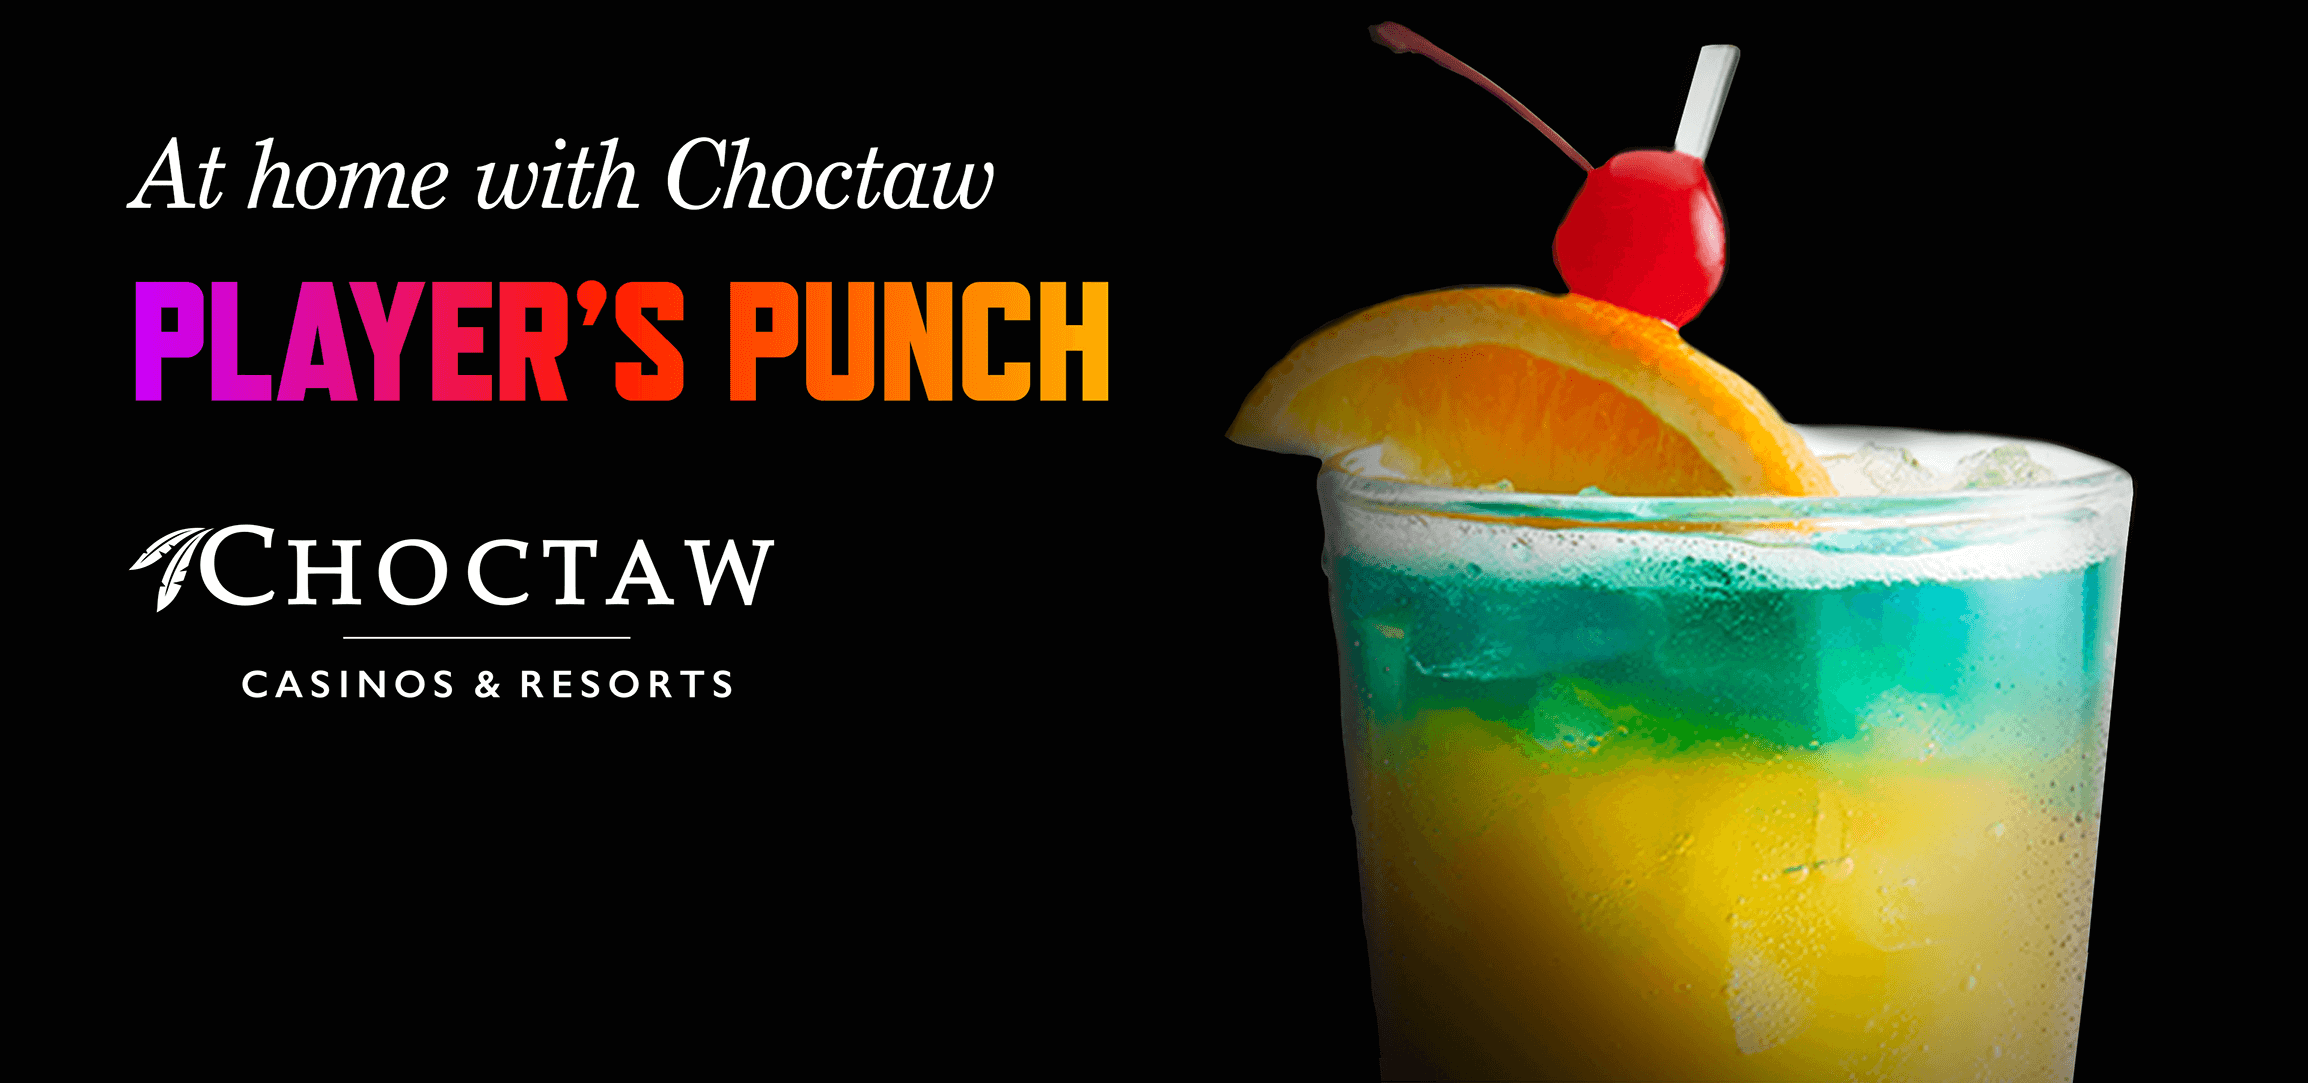 At Home with Choctaw - Player's Punch